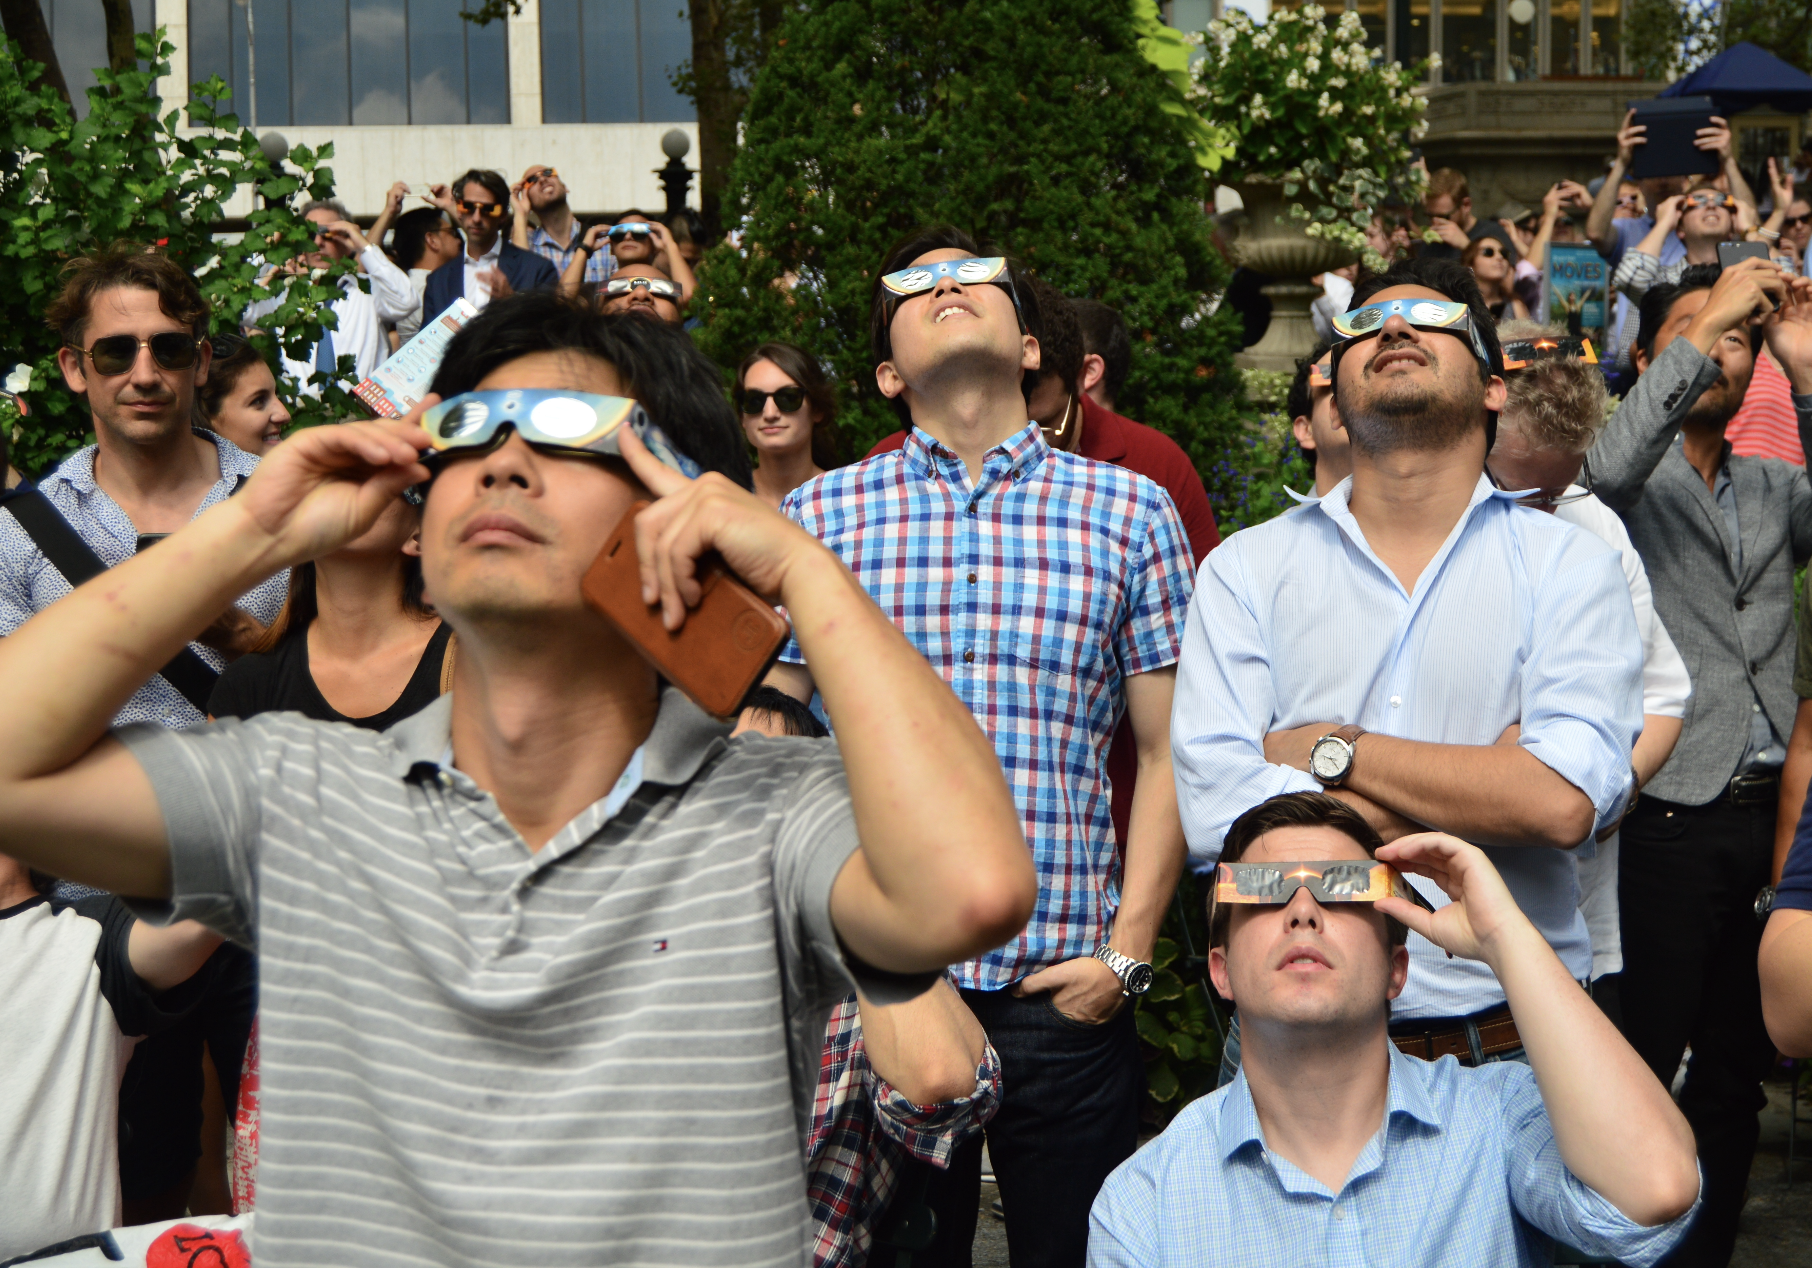 NYC public libraries are giving away free solar eclipse glasses